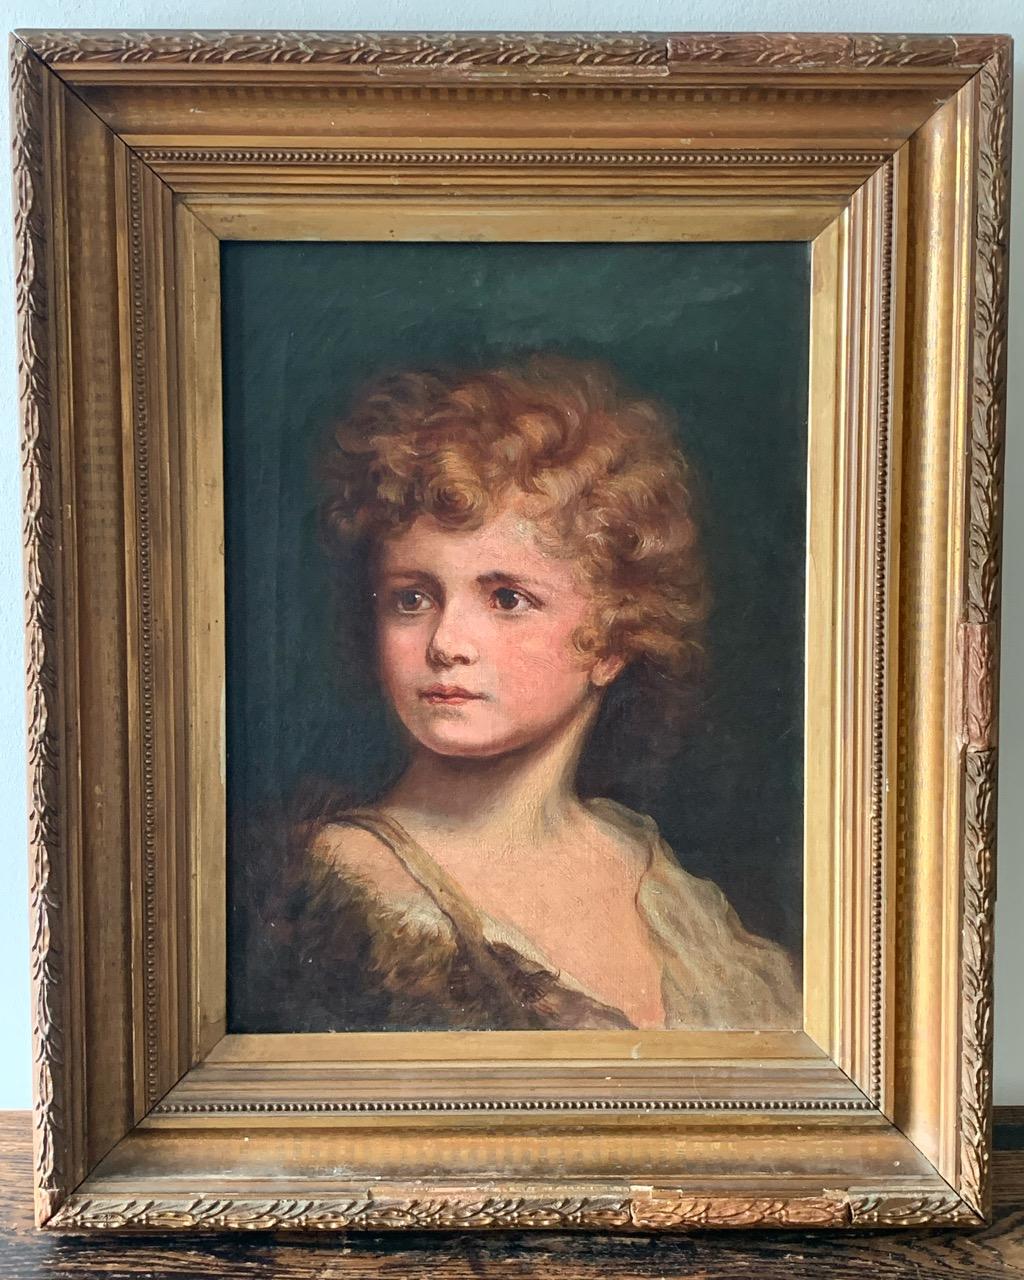 A lovely quality 19th century oil on canvas portrait painting of a young boy in a period frame. Some old repairs on the frame.